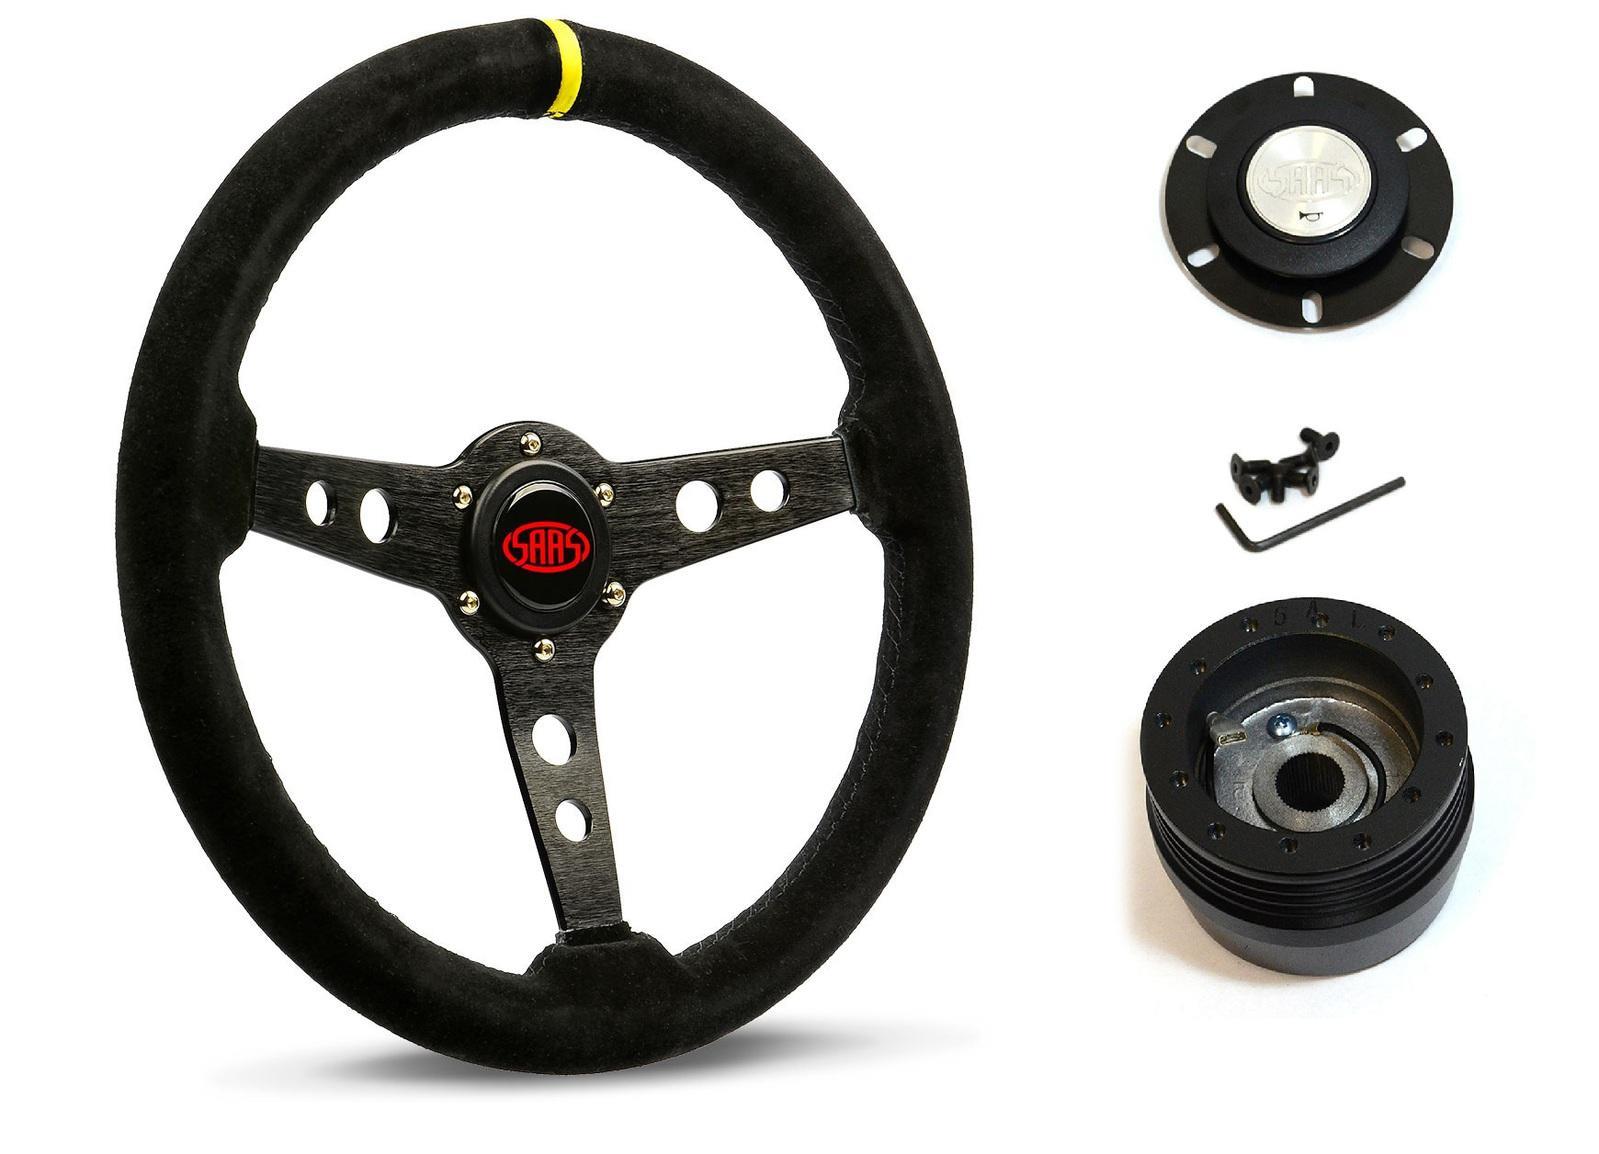 SAAS Steering Wheel Suede 14" ADR Retro Black Spoke + Indicator SW616OS-S and SAAS boss kit for Ford Meteor All Models 1981-1987